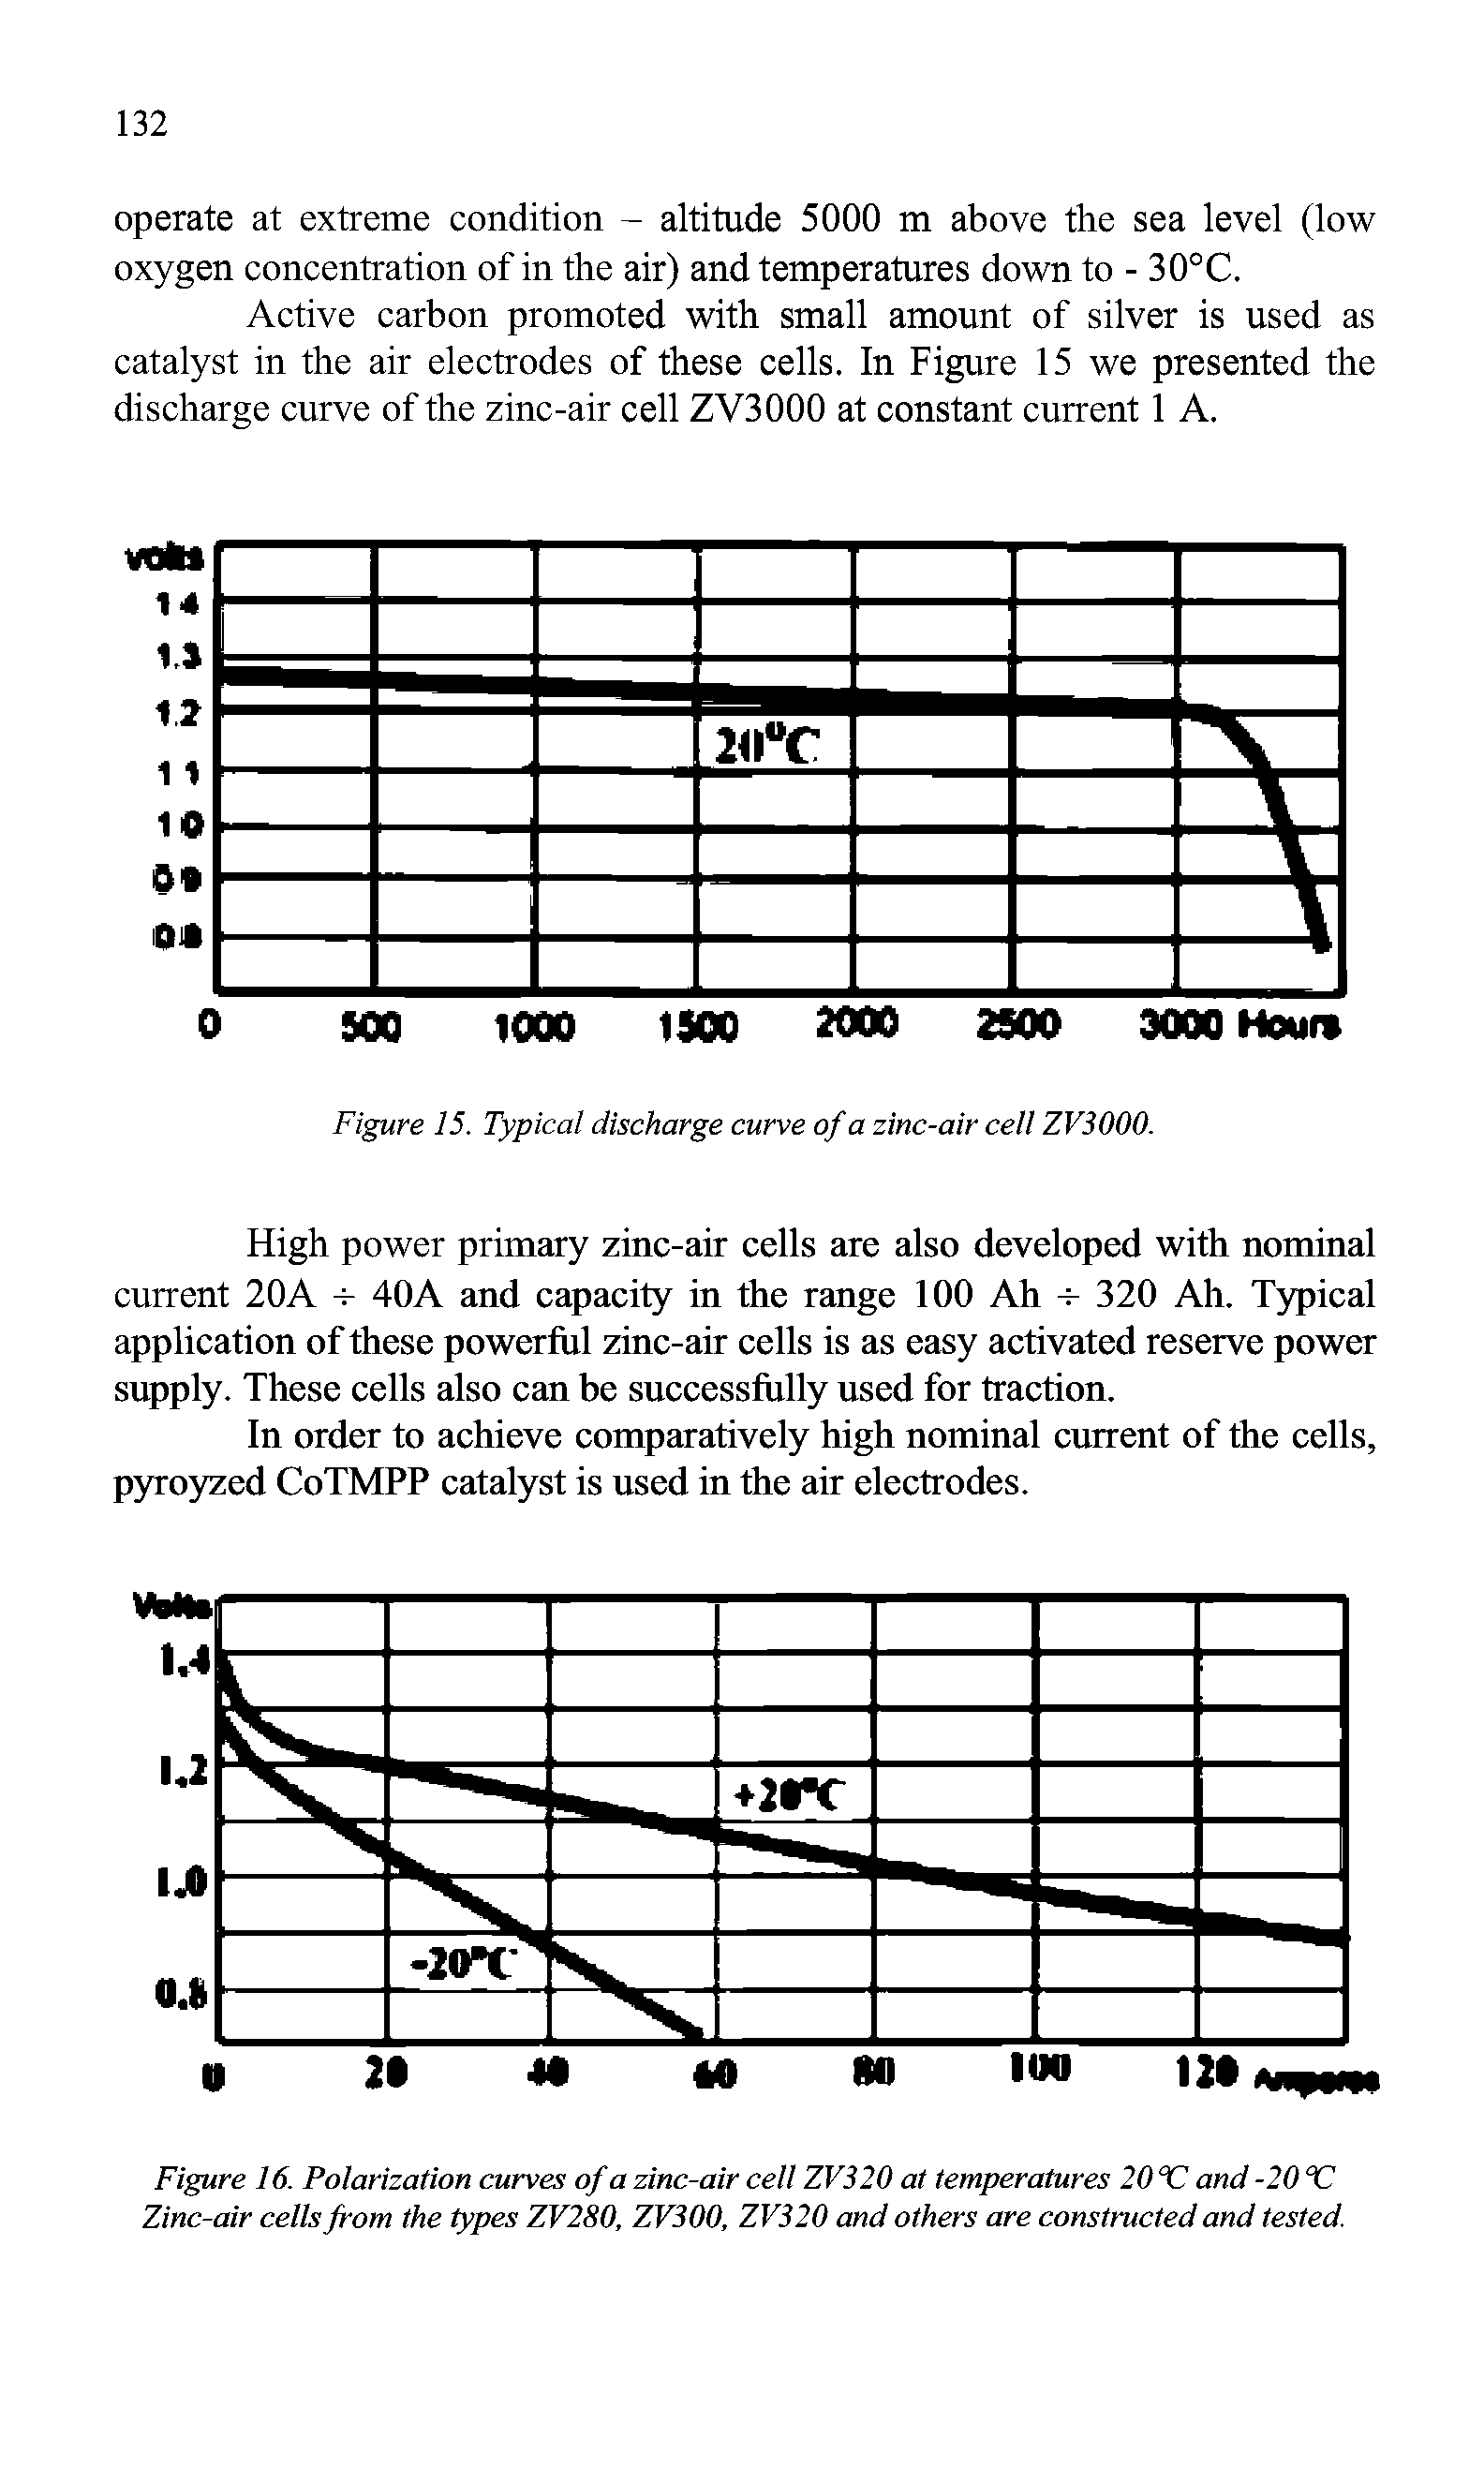 Figure 16. Polarization curves of a zinc-air cell ZV320 at temperatures 20 °C and -20 °C Zinc-air cells from the types ZV280, ZV300, ZV320 and others are constructed and tested.